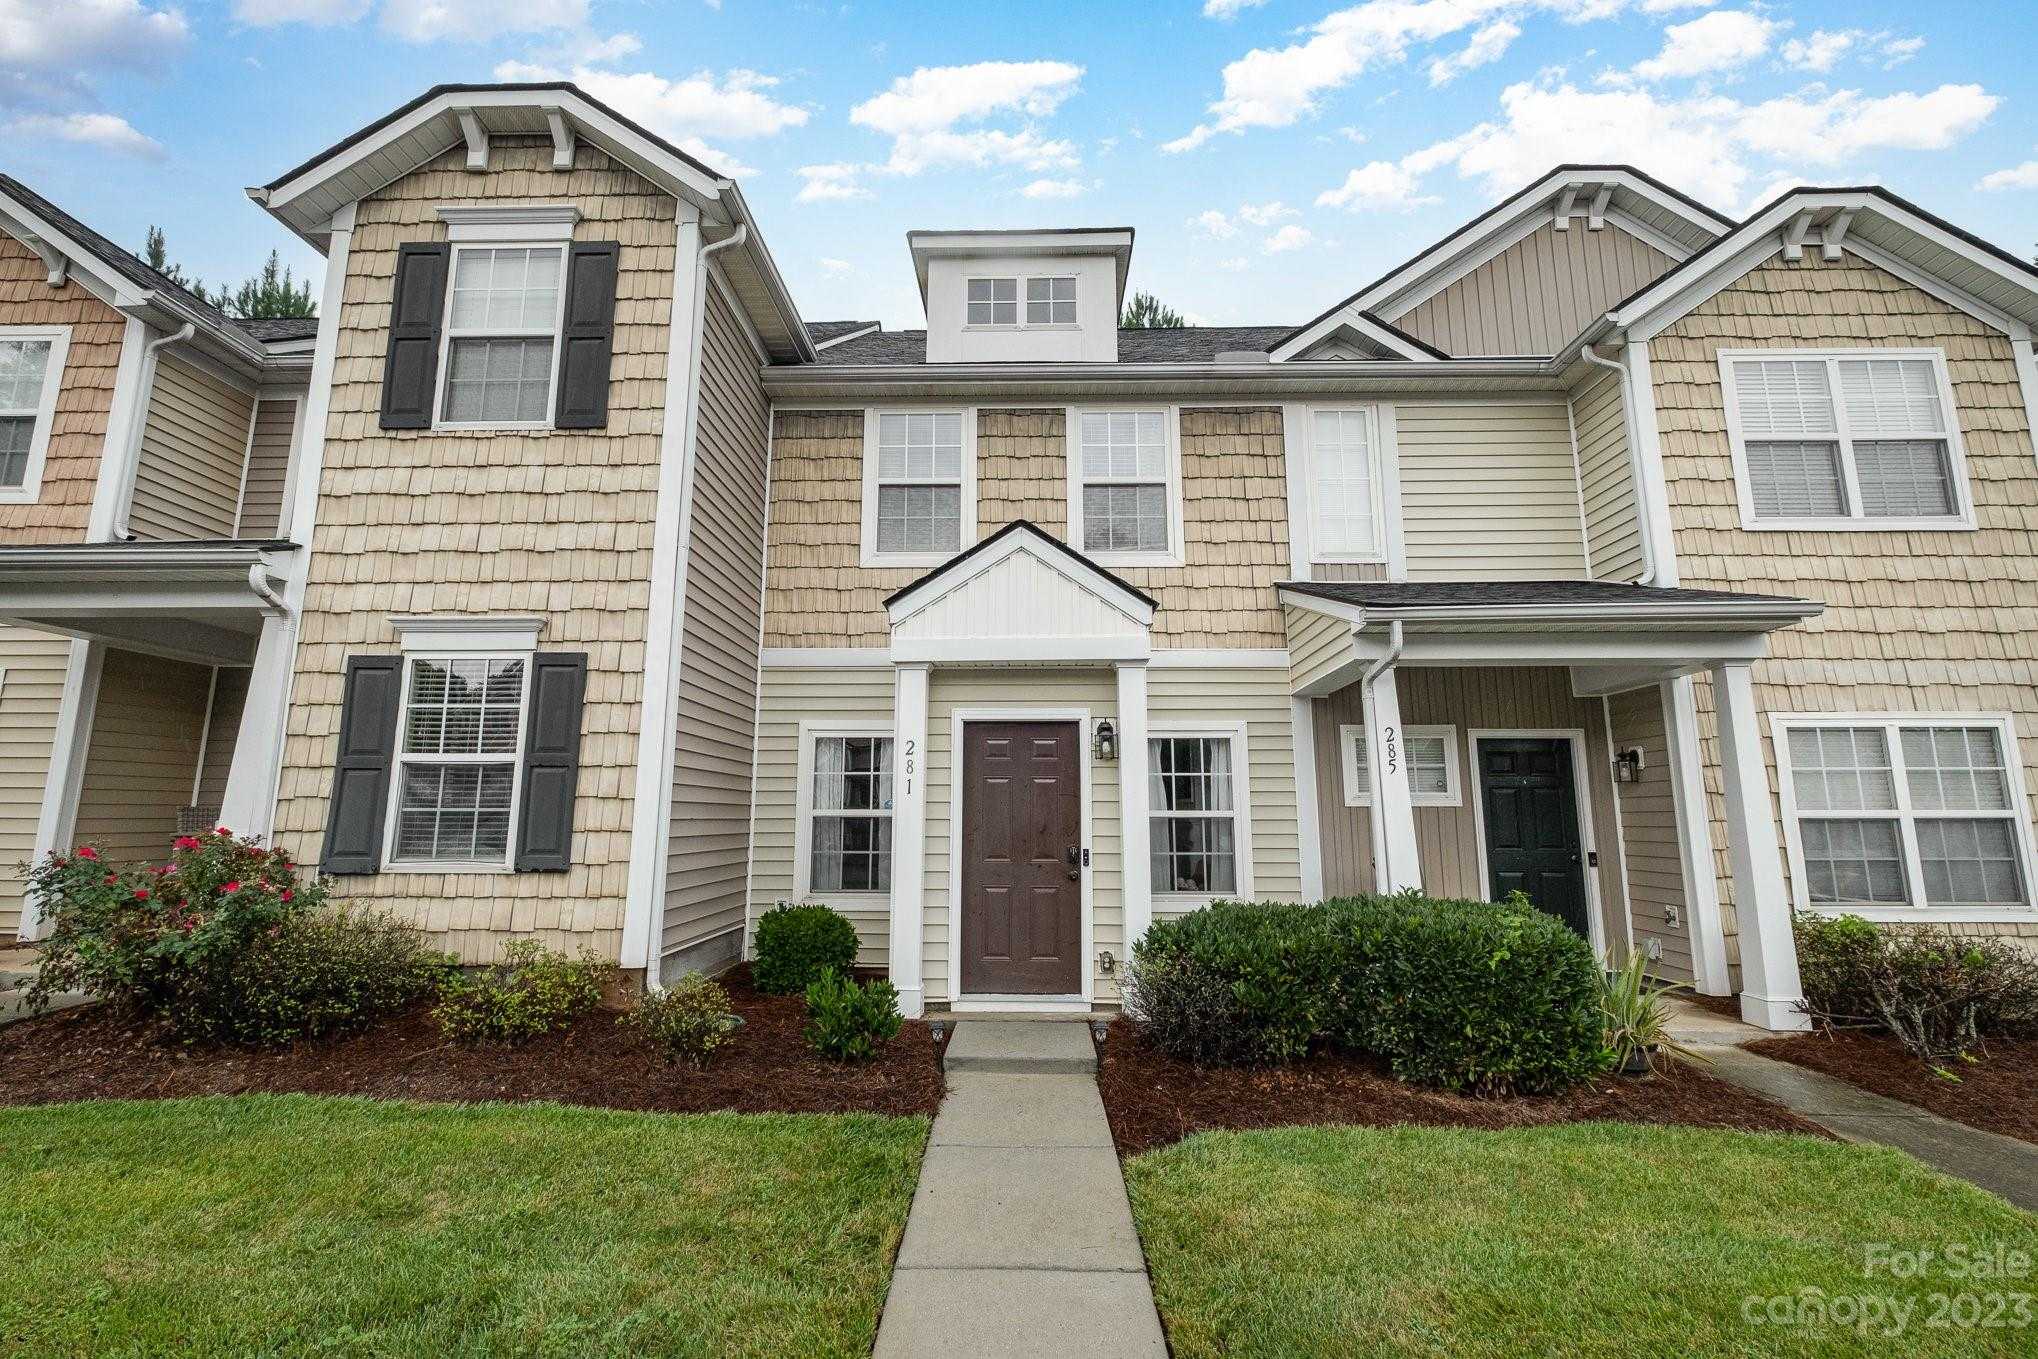 View Rock Hill, SC 29732 townhome